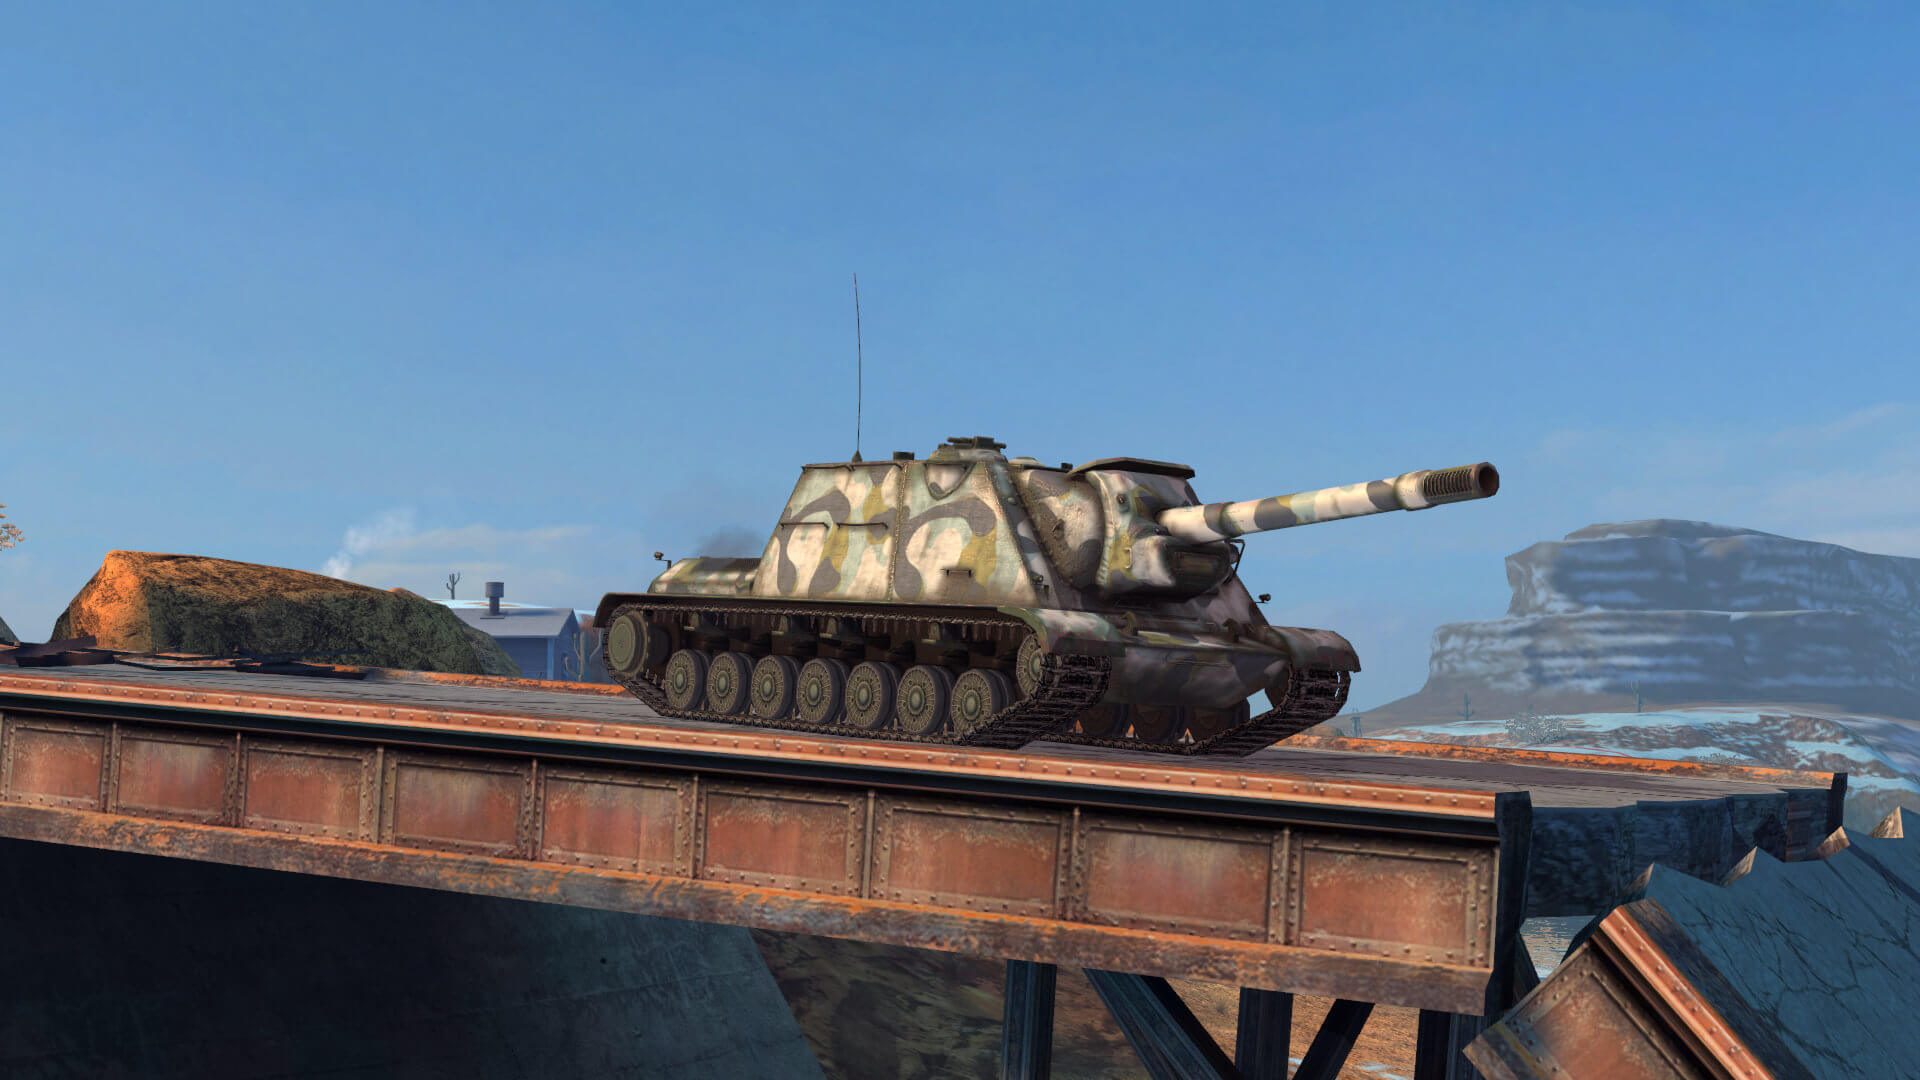 Feb 21 19 Update 5 8 World Of Tanks Blitz Tog Ii Just Two Words Mad Games From March 15 The Mad Modifications Will Be Back For A Week But This Time They Will Be Available On A Greater Number Of Maps Which Means Battles In This Mode Will